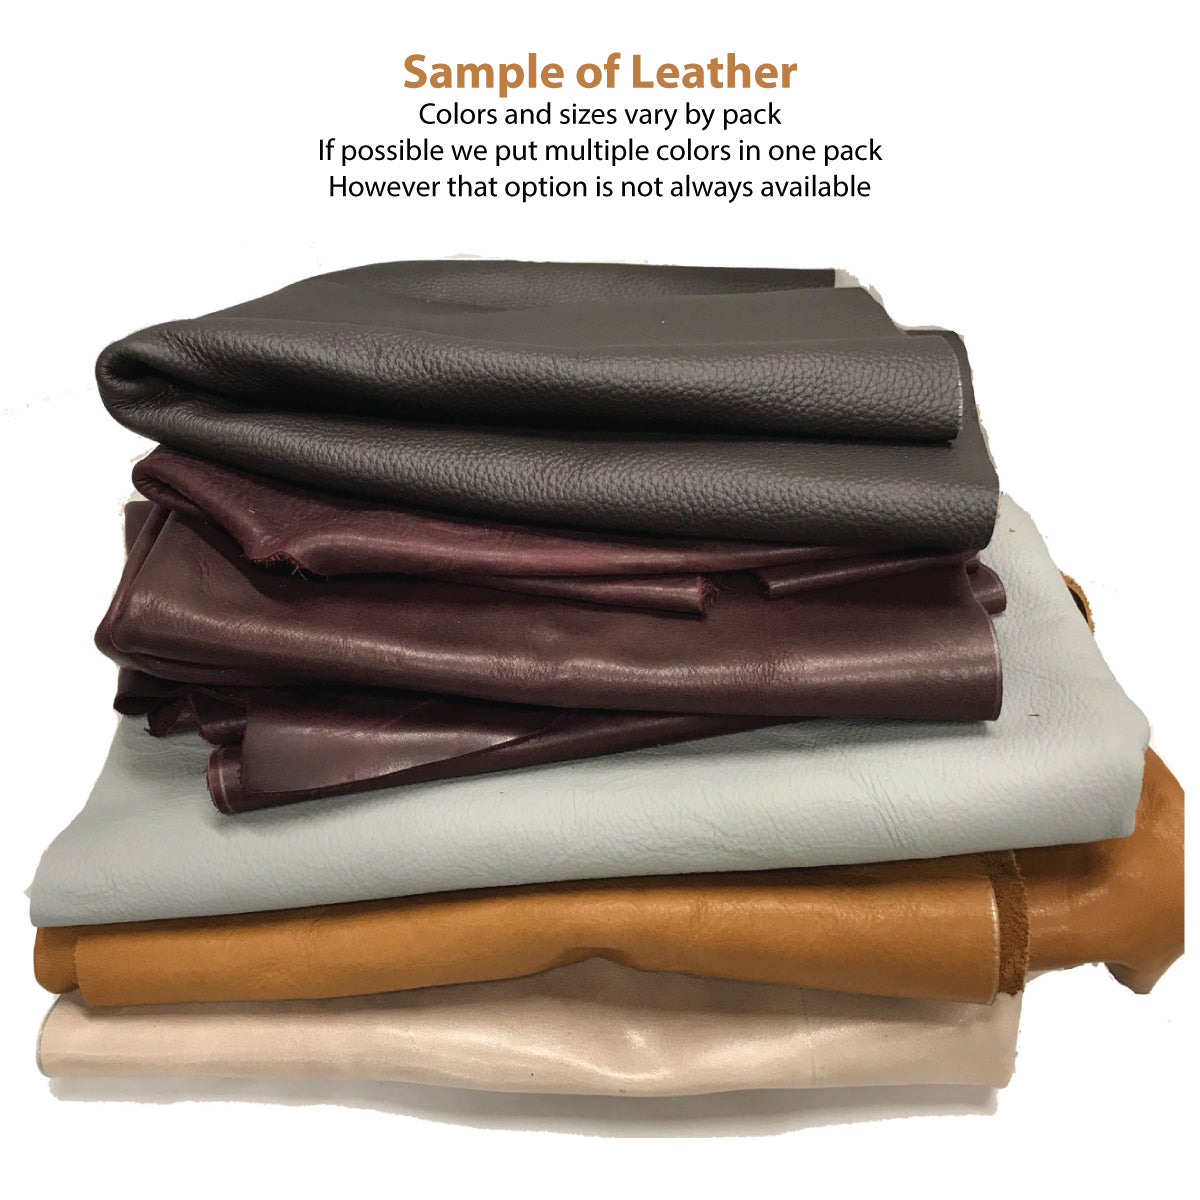 5 lbs Leather pieces: 8-15 pieces per bag